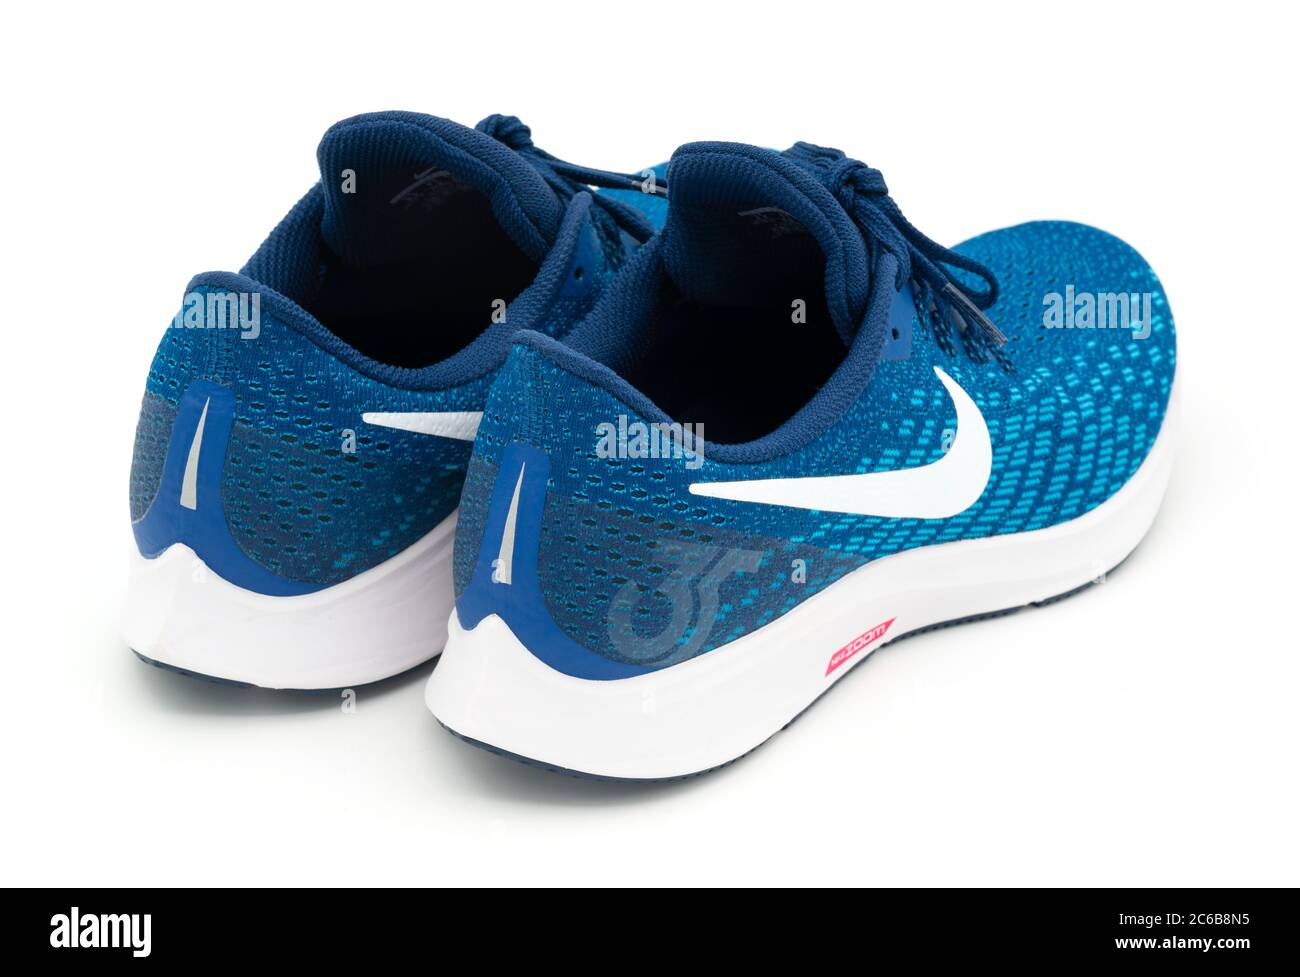 Pair of blue and white Nike Pegasus 35 running shoes Stock Photo